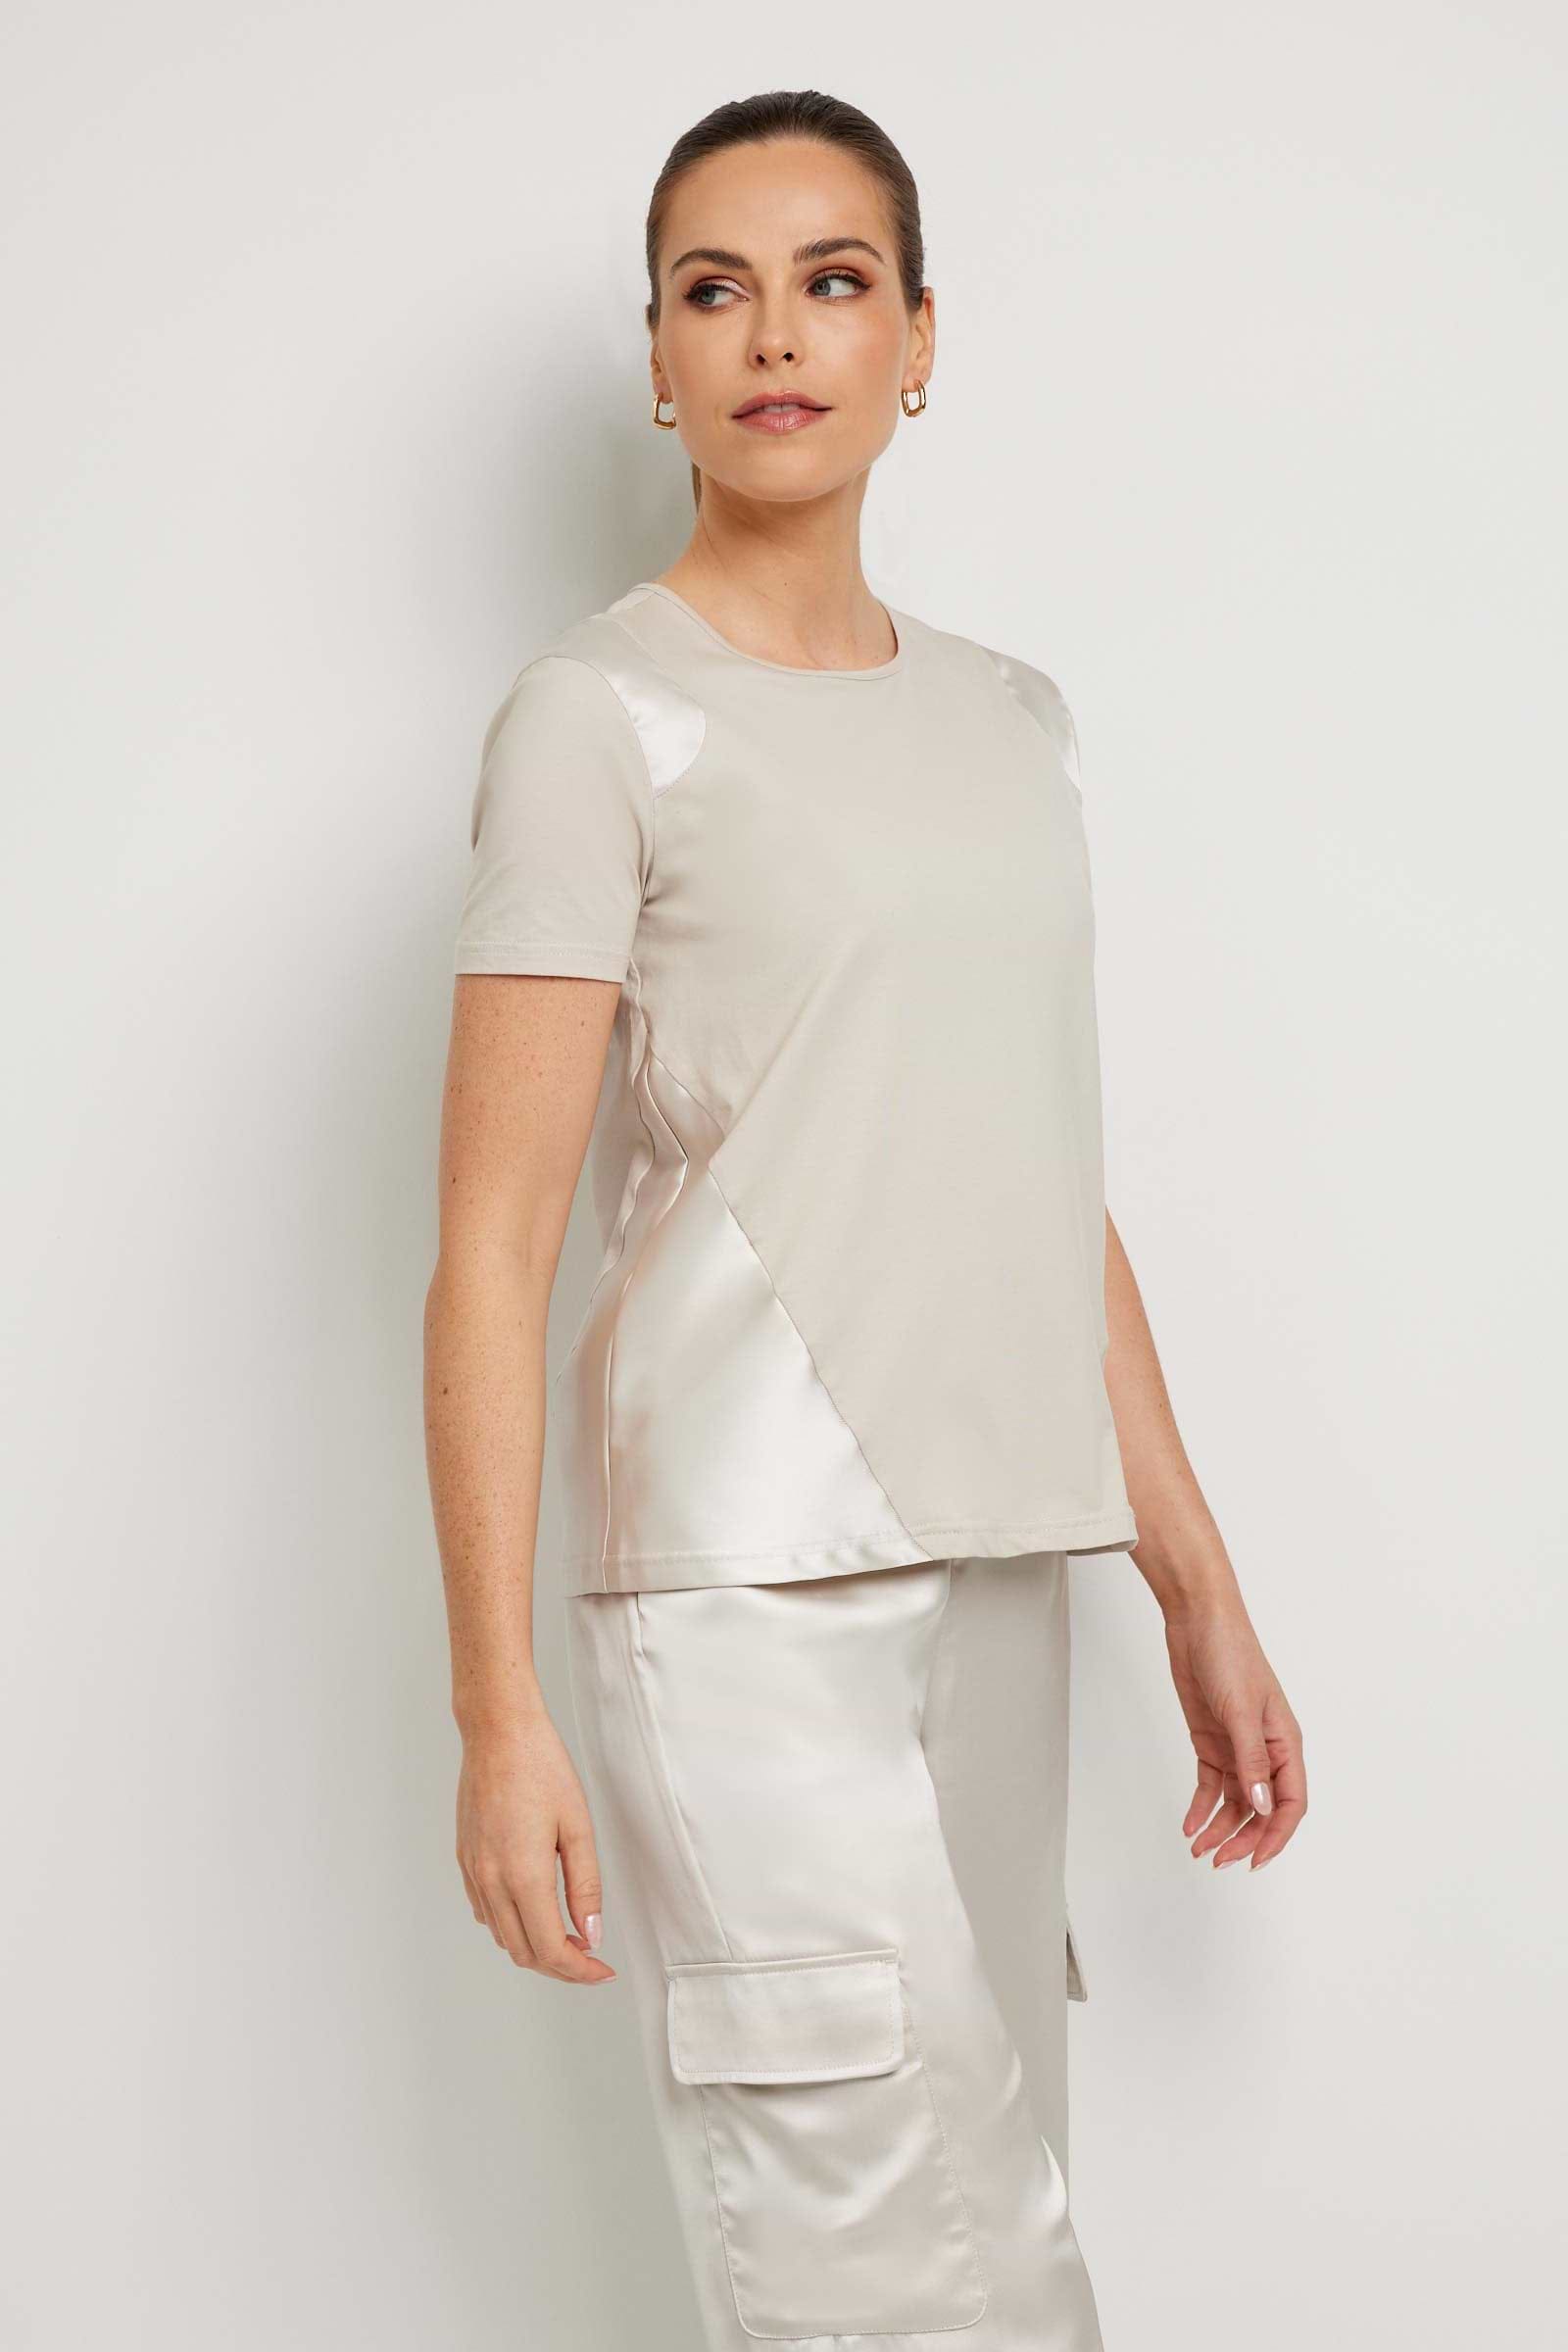 The Best Travel Top. Woman Showing the Side Profile of a Carmella Top in Stone.